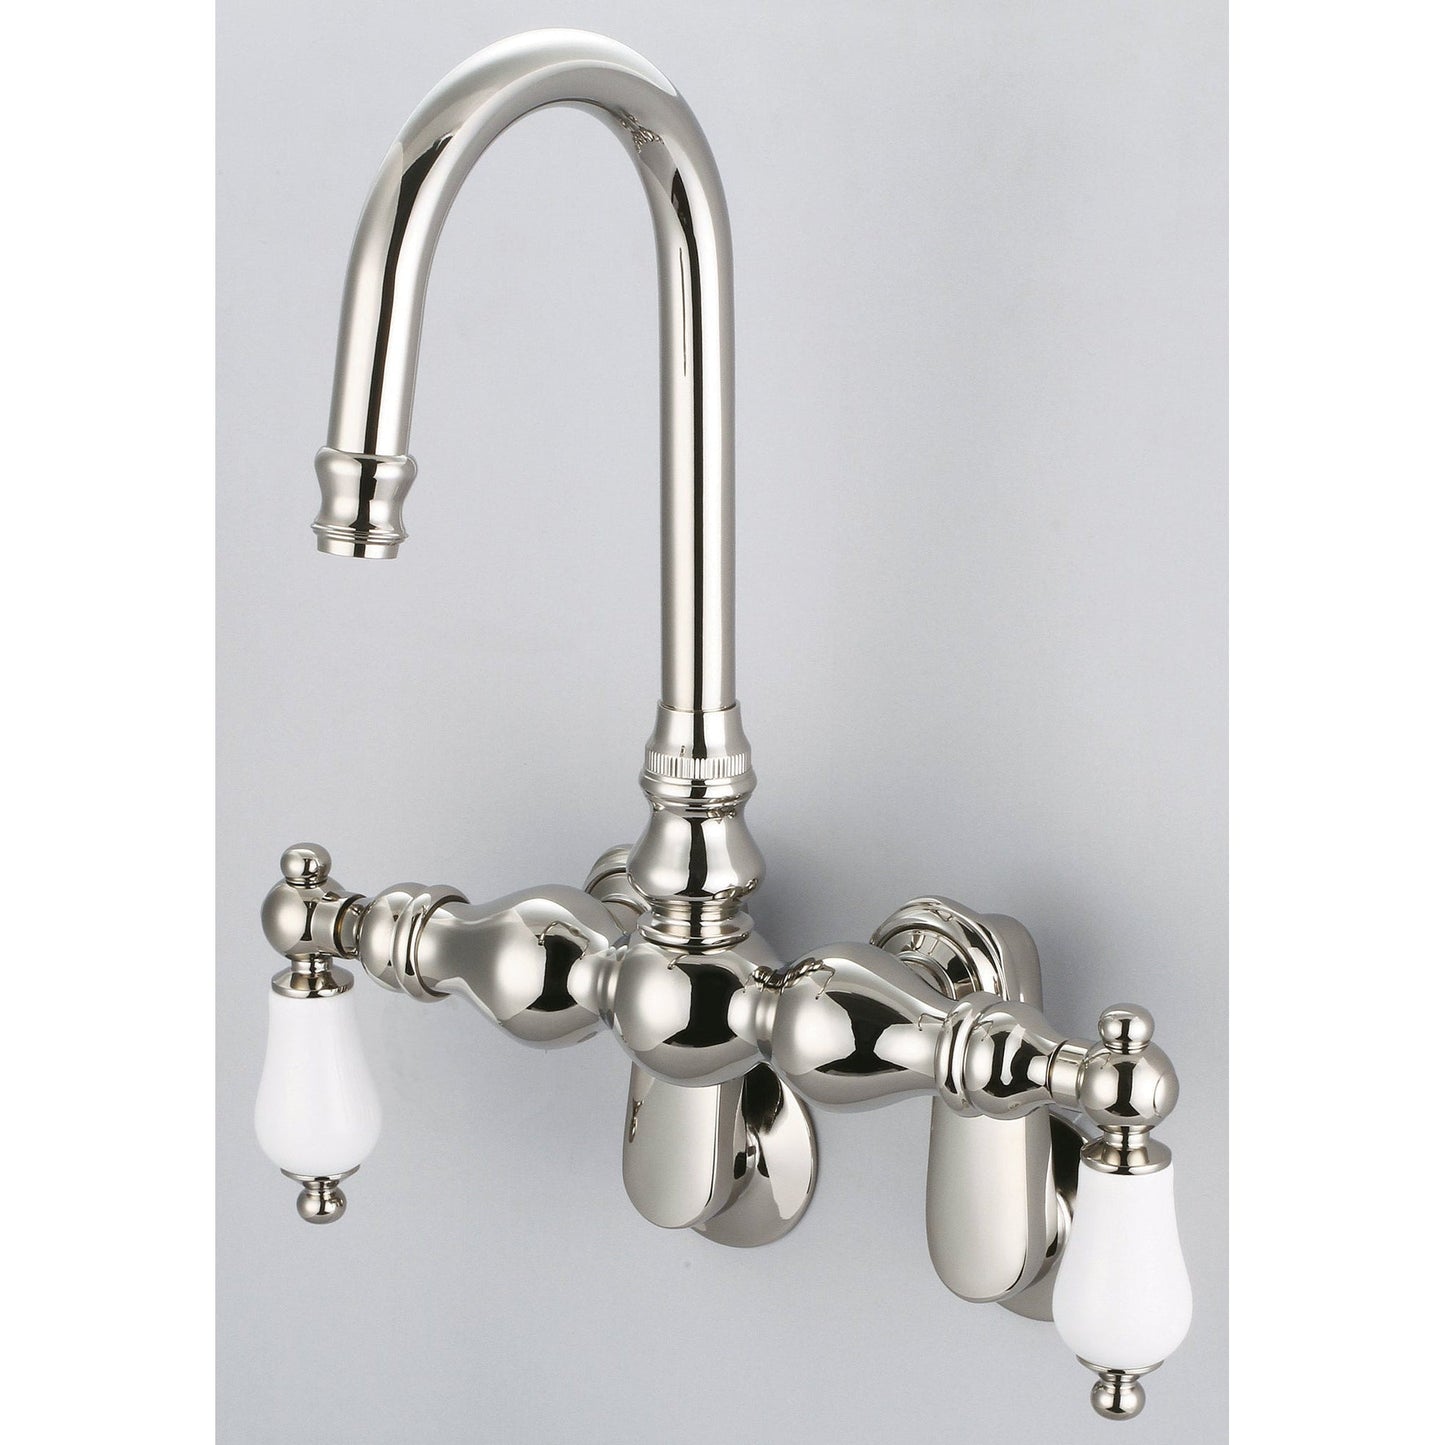 Water Creation Vintage Classic Adjustable Spread Wall Mount Tub F6-0015 9.25" Ivory Solid Brass Faucet With Gooseneck Spout And Swivel Wall Connector And Porcelain Lever Handles Without Labels